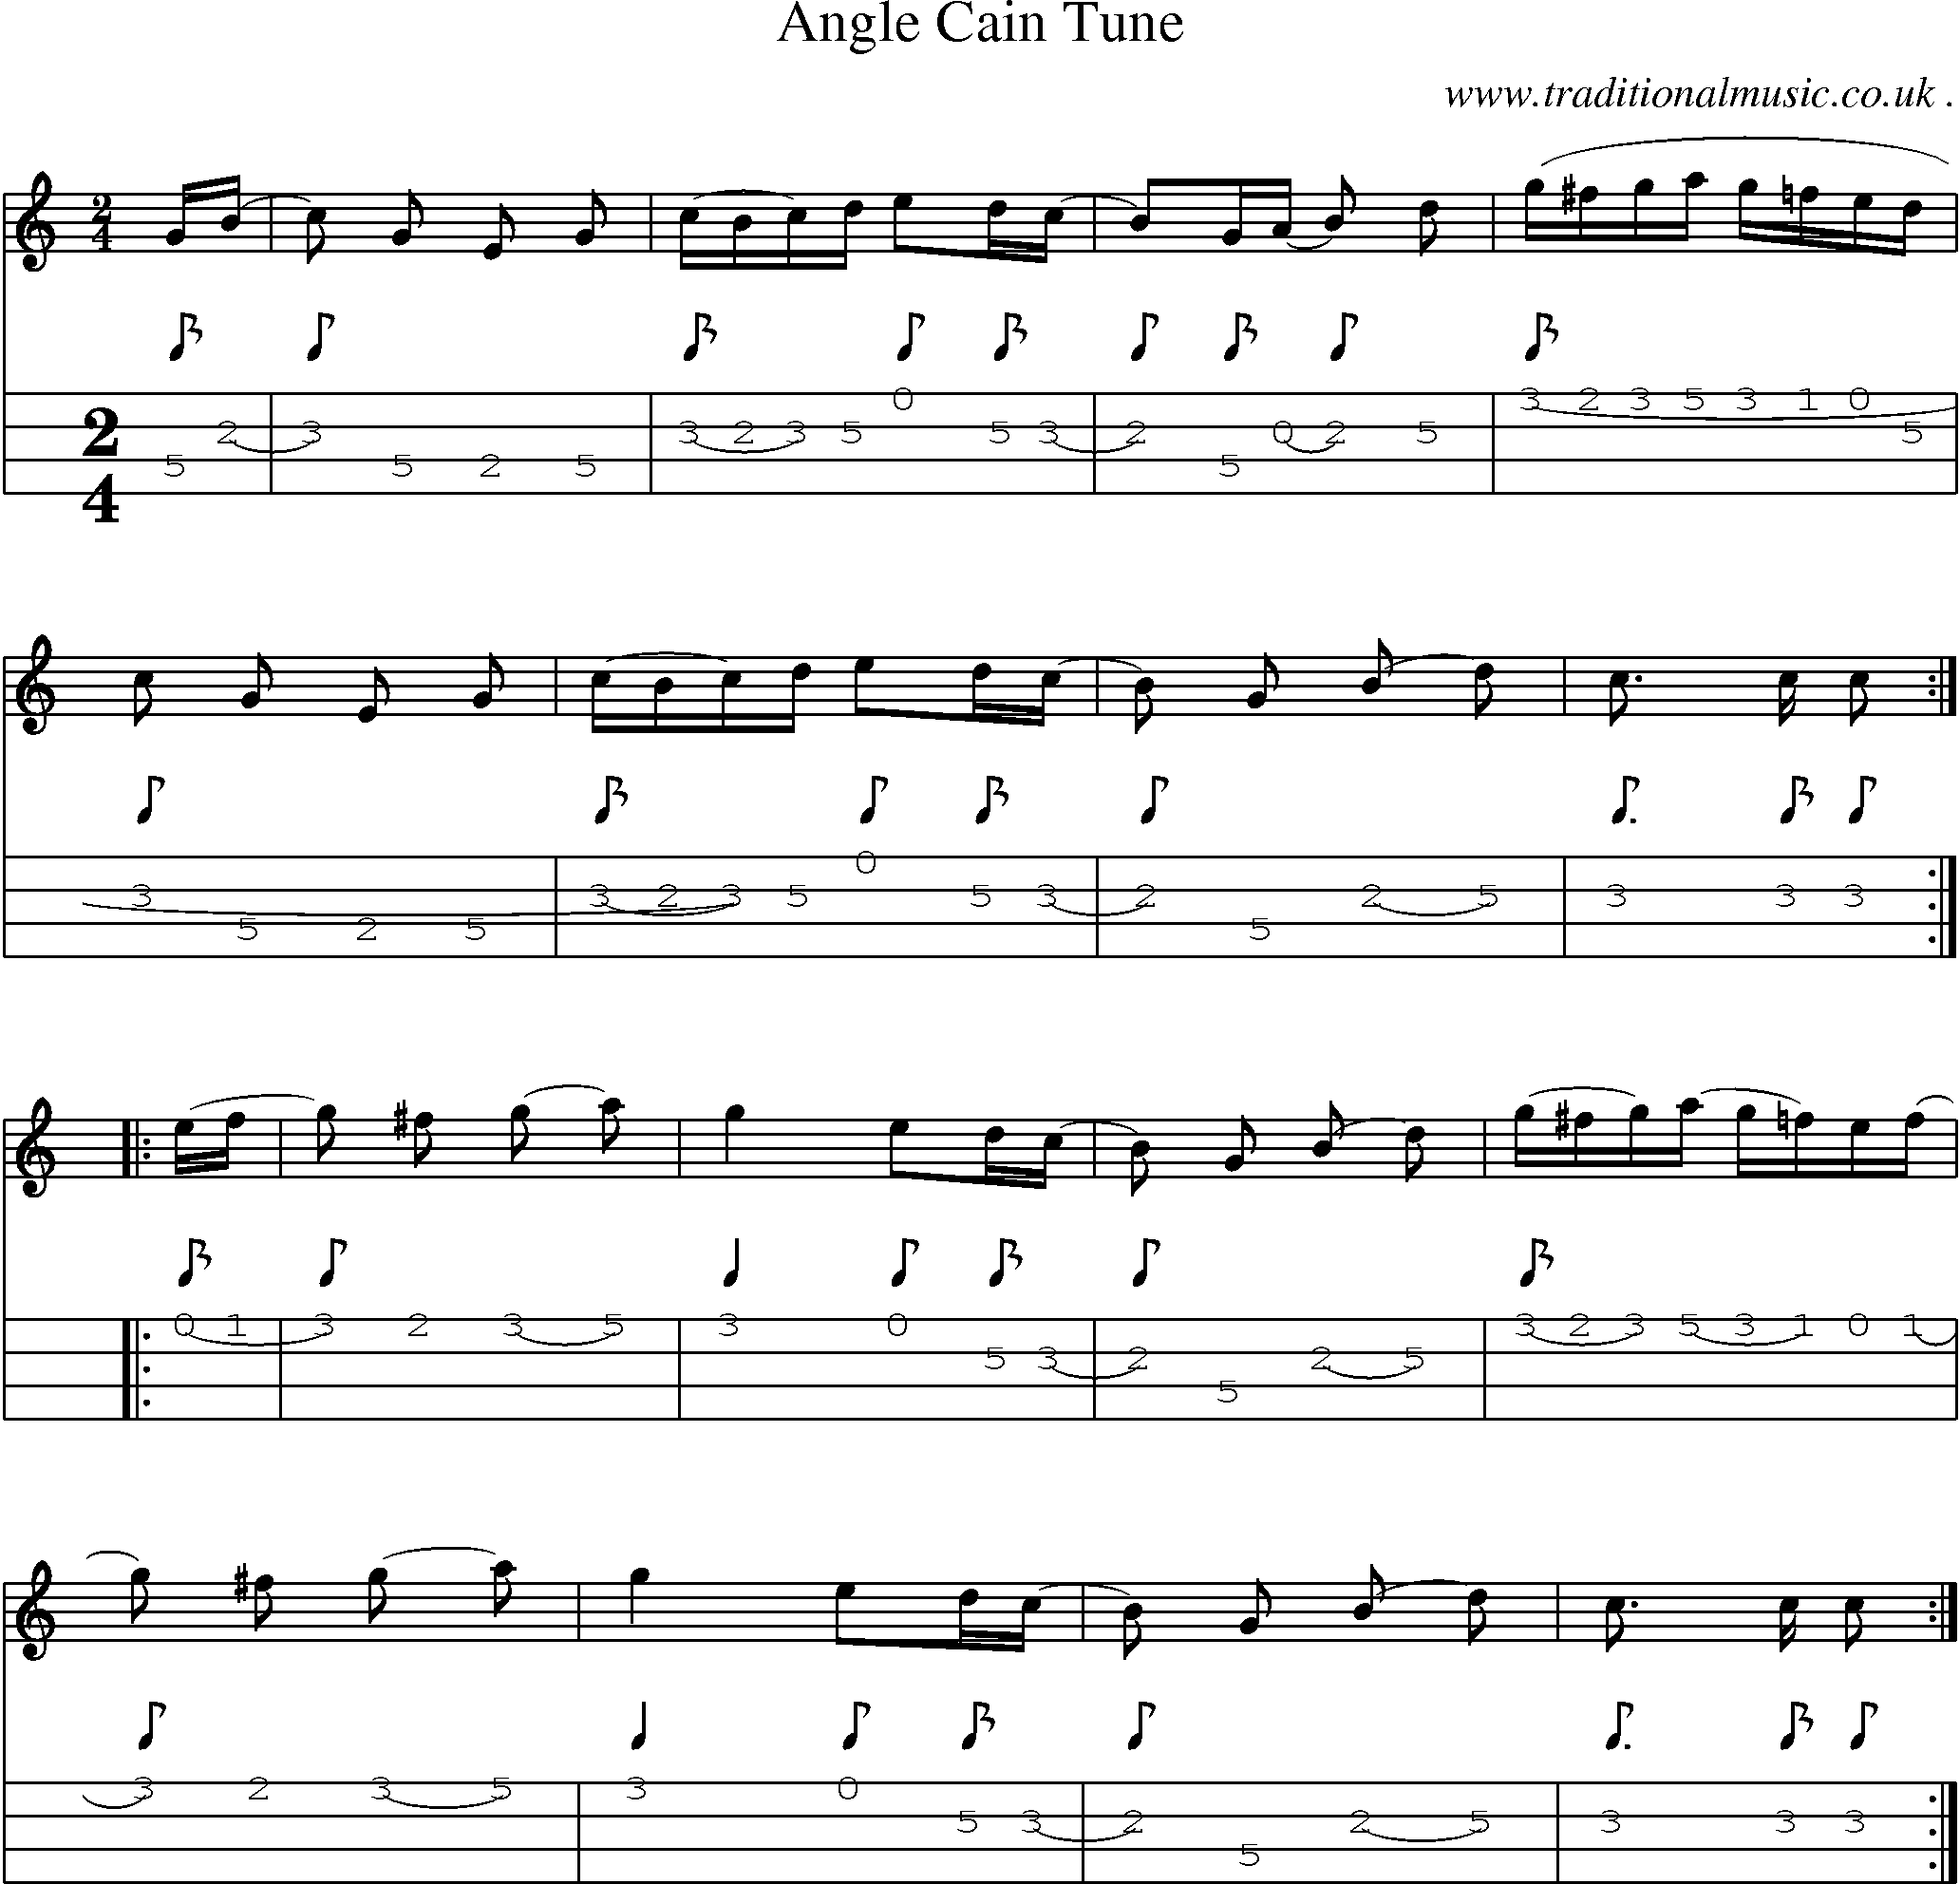 Music Score and Guitar Tabs for Angle Cain Tune